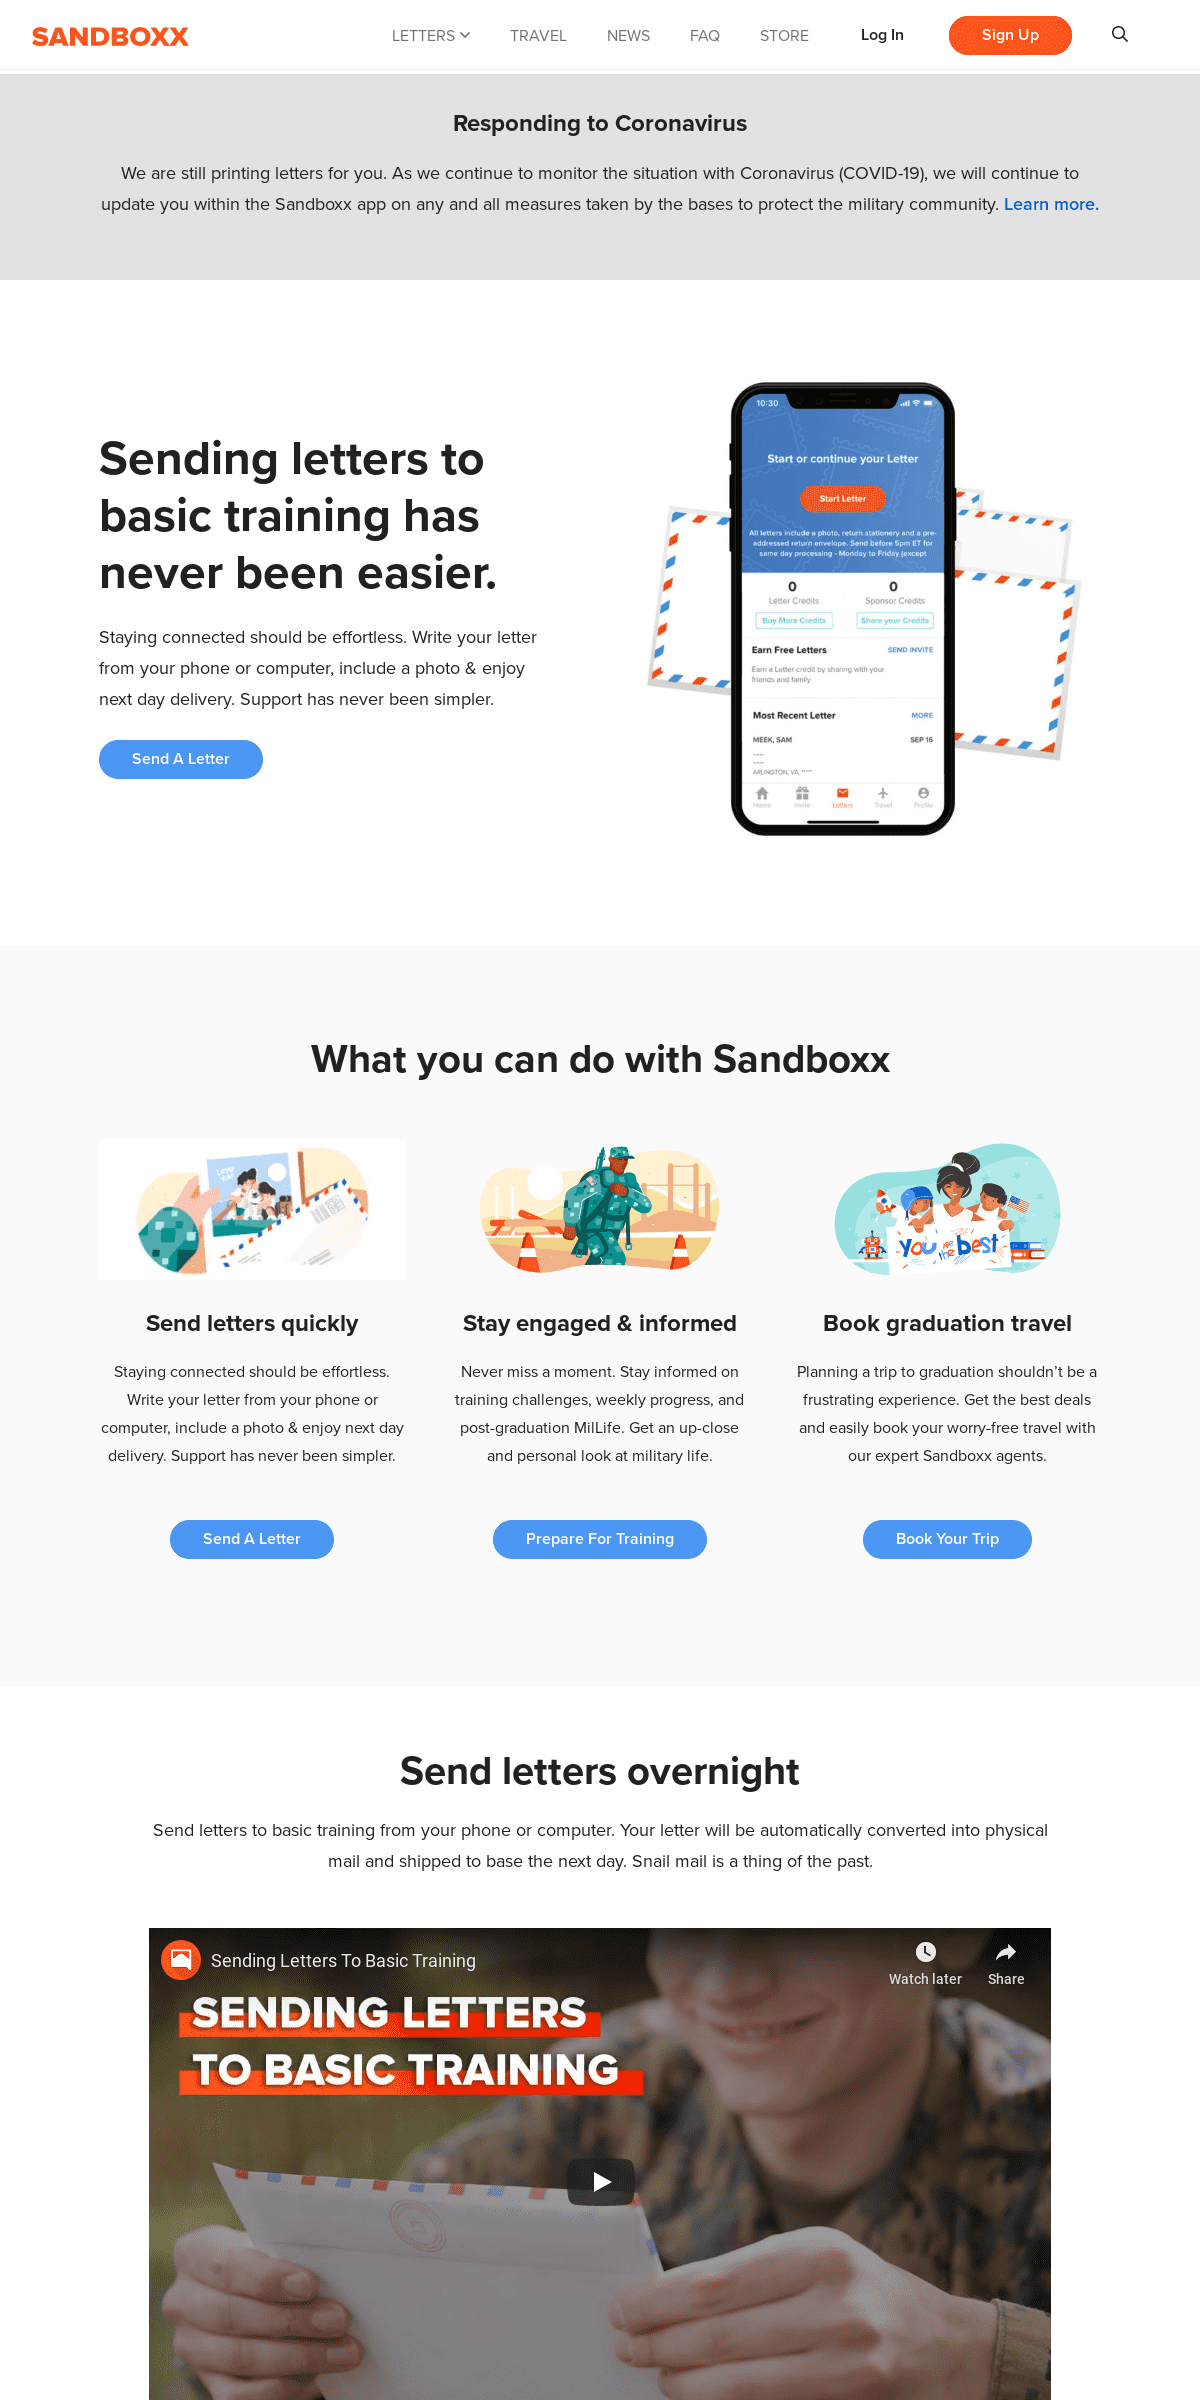 Sandboxx - Connecting Our Military Community